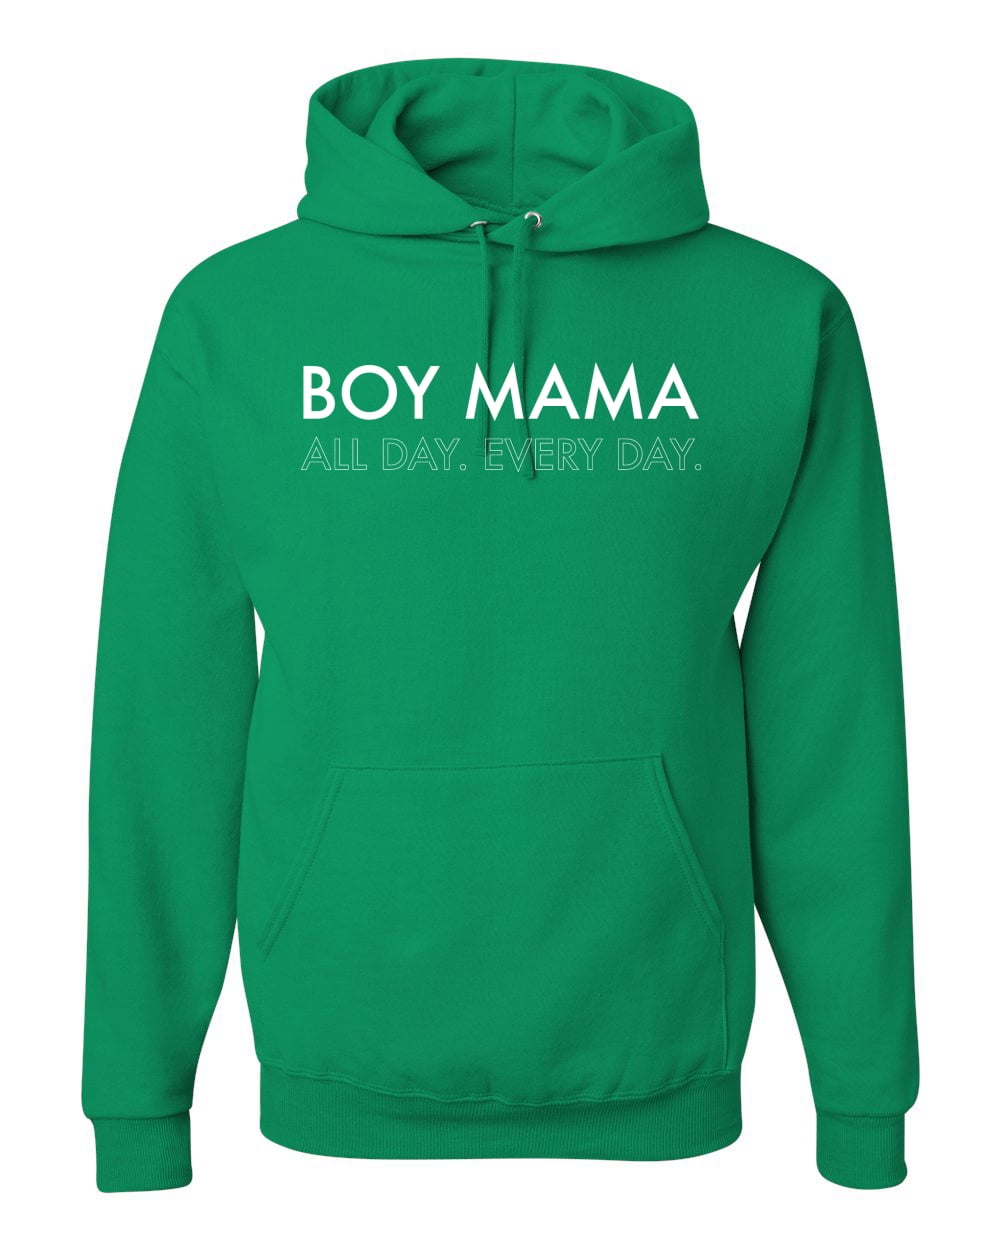 Funny Mothers Day Gift From Son Mom Always Awesome Shirt & Hoodie